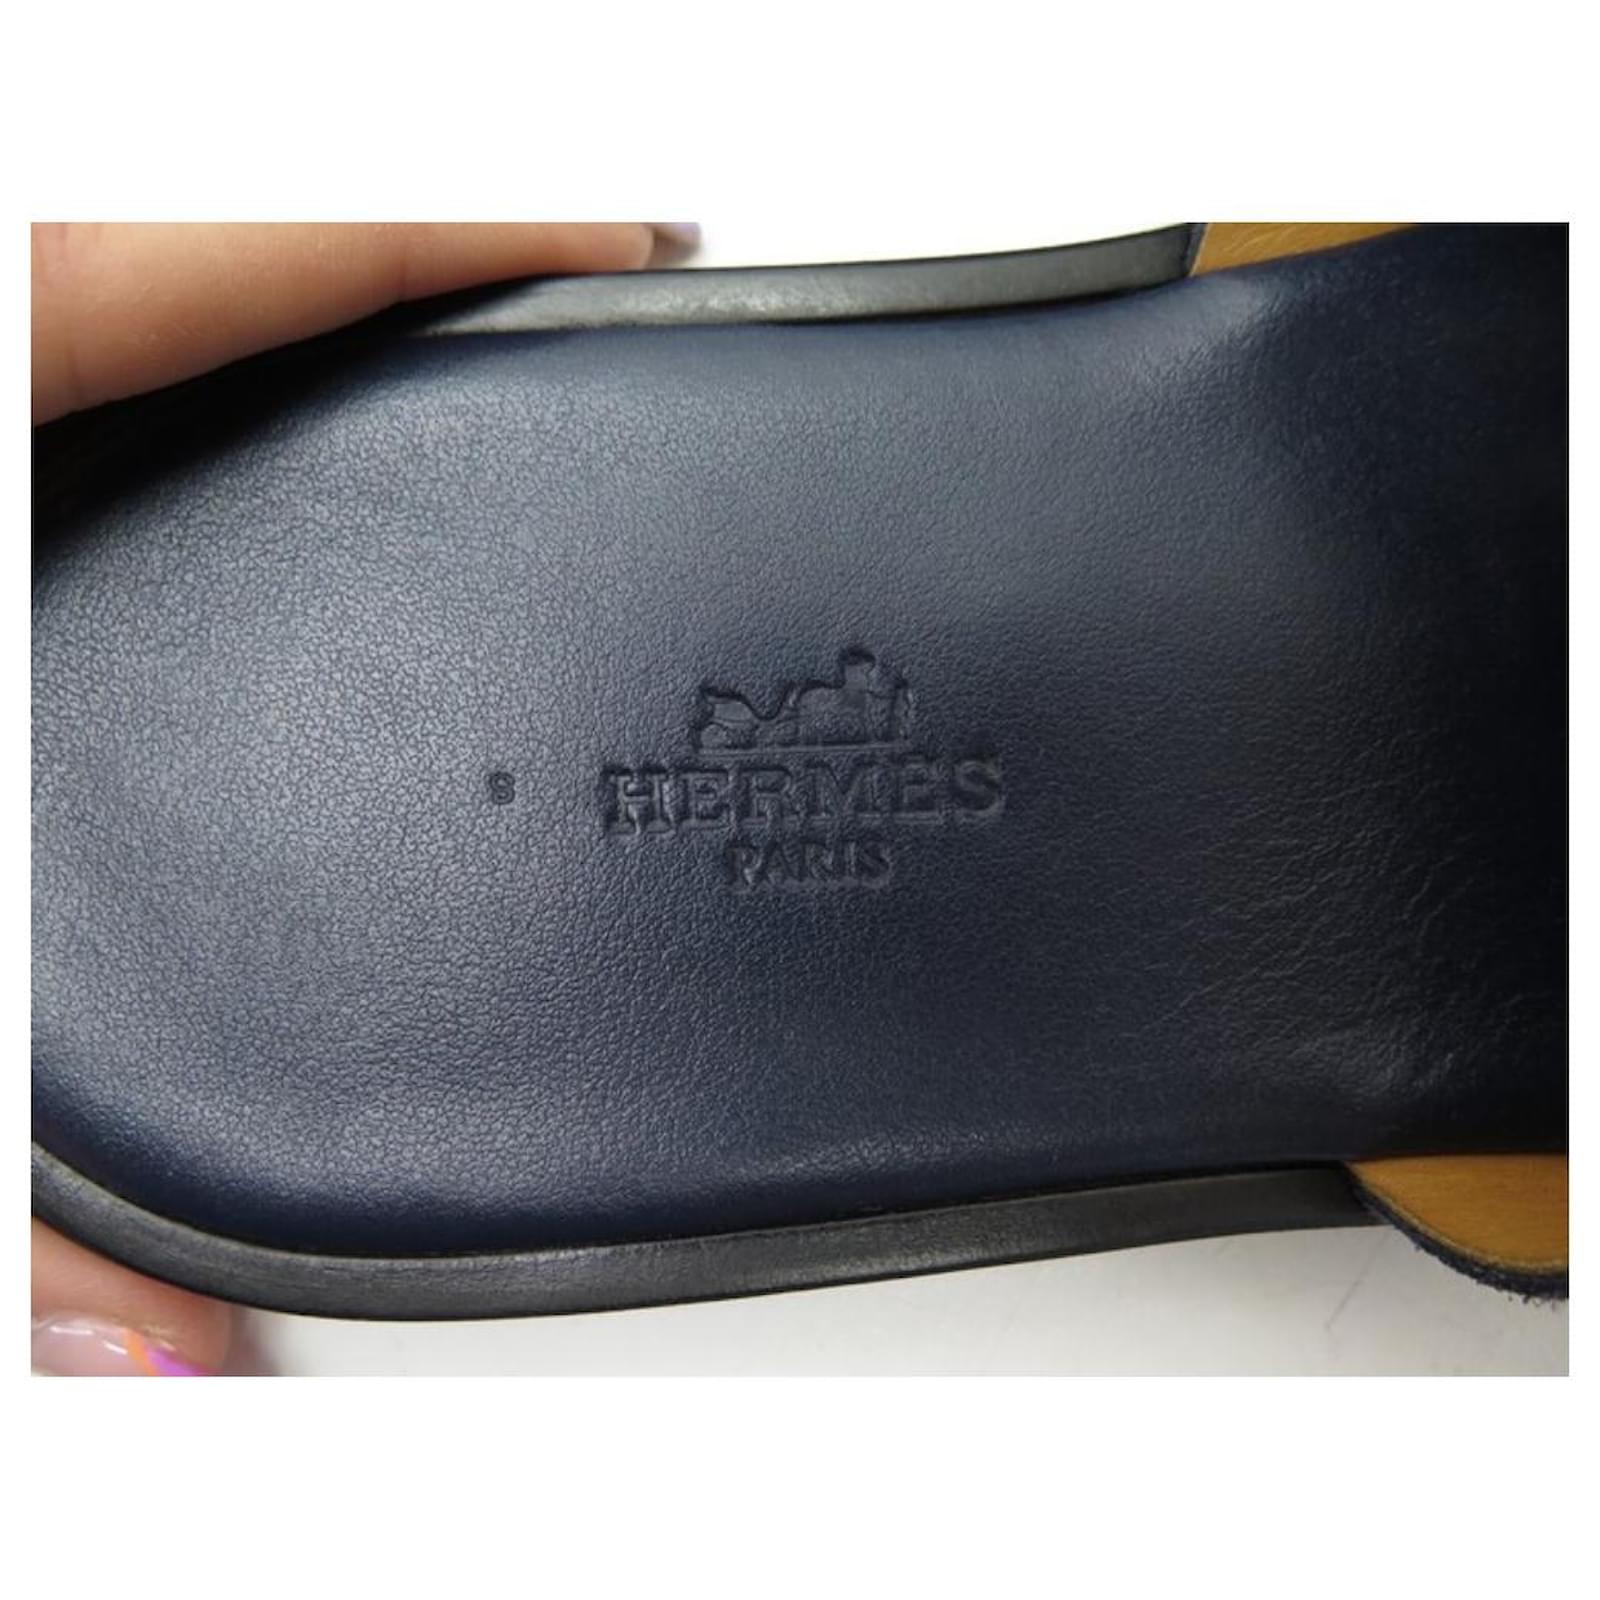 Hermes Izmir Sandals In Navy Blue Clemence Leather